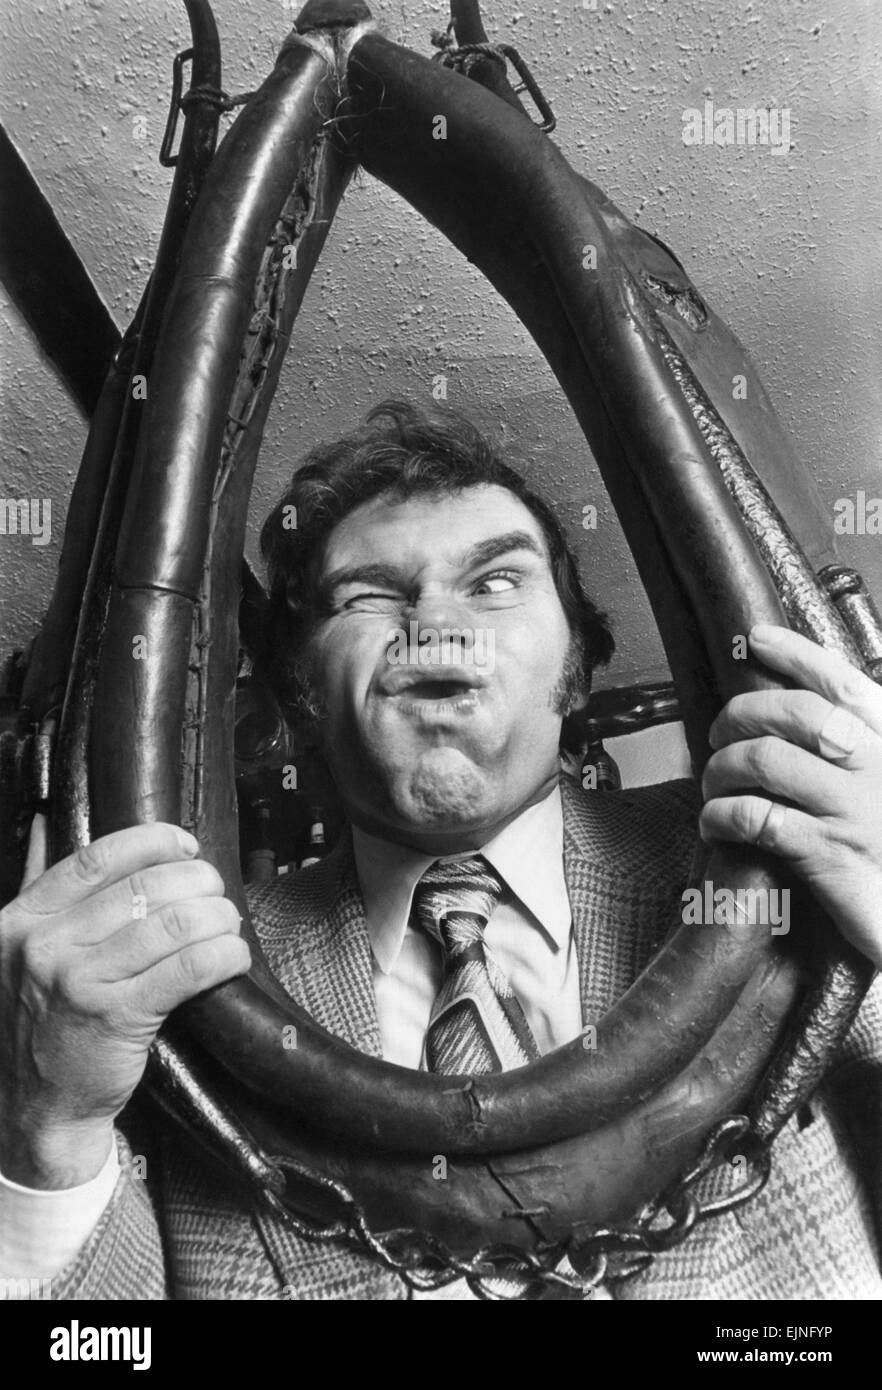 Mr. Gordon Mackinson, seen rehearsing for the start of the World Gurning championships which will be held in Britain this year. 22nd January 1977 Stock Photo